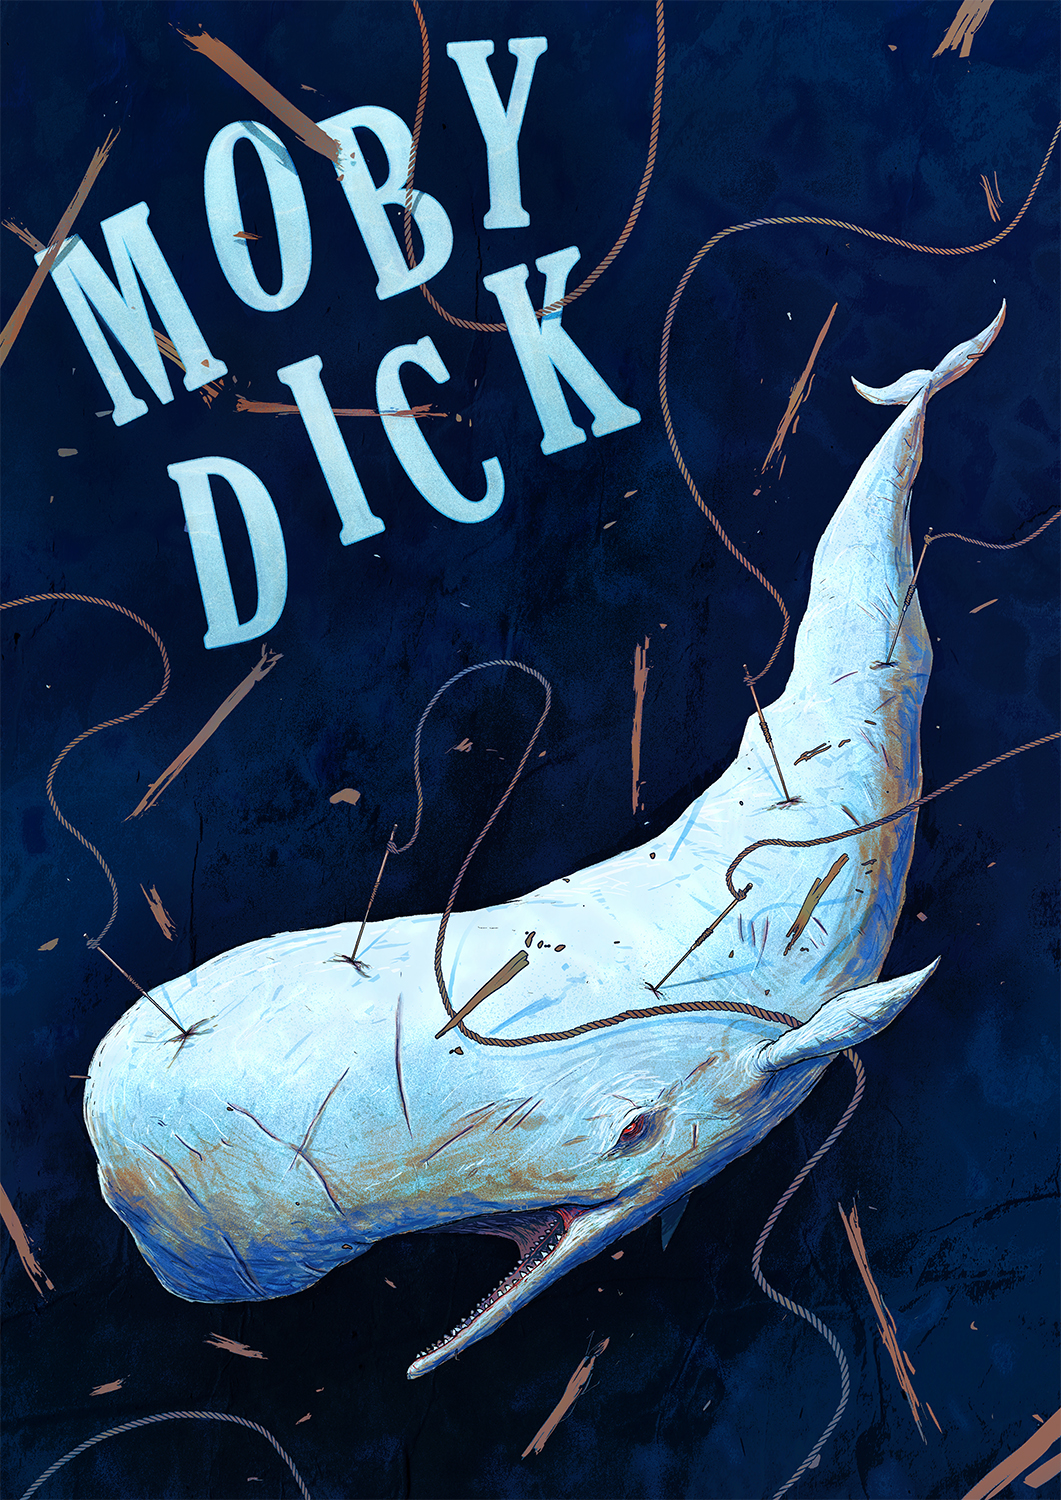 Moby-Dick Moby Dick White Whale book movie